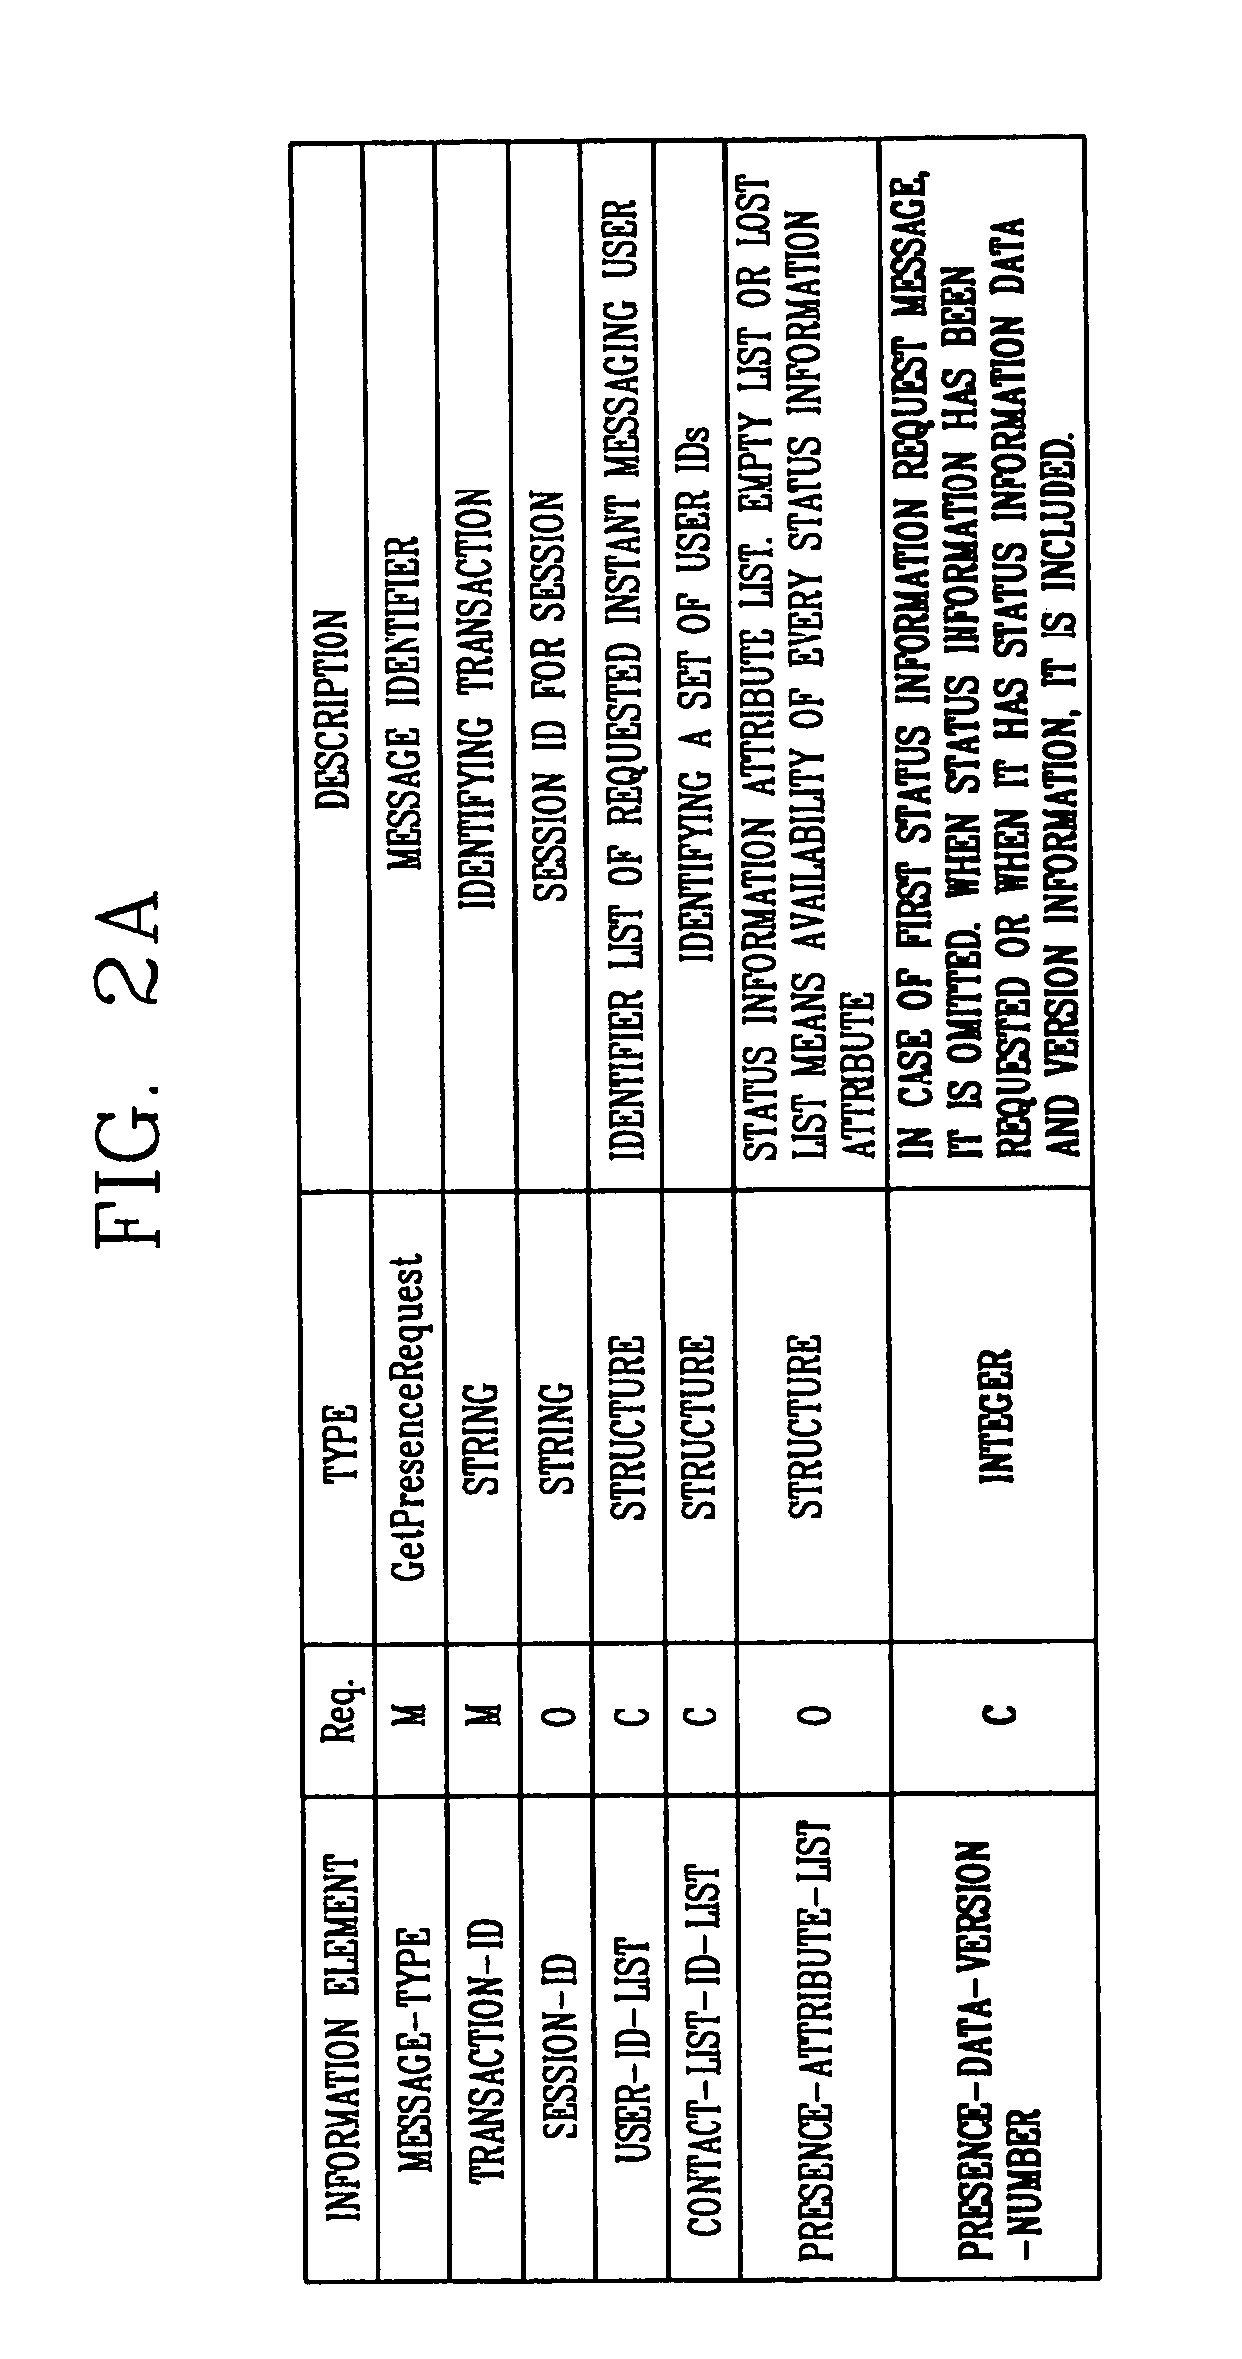 Method for synchronizing status information of IMPS client